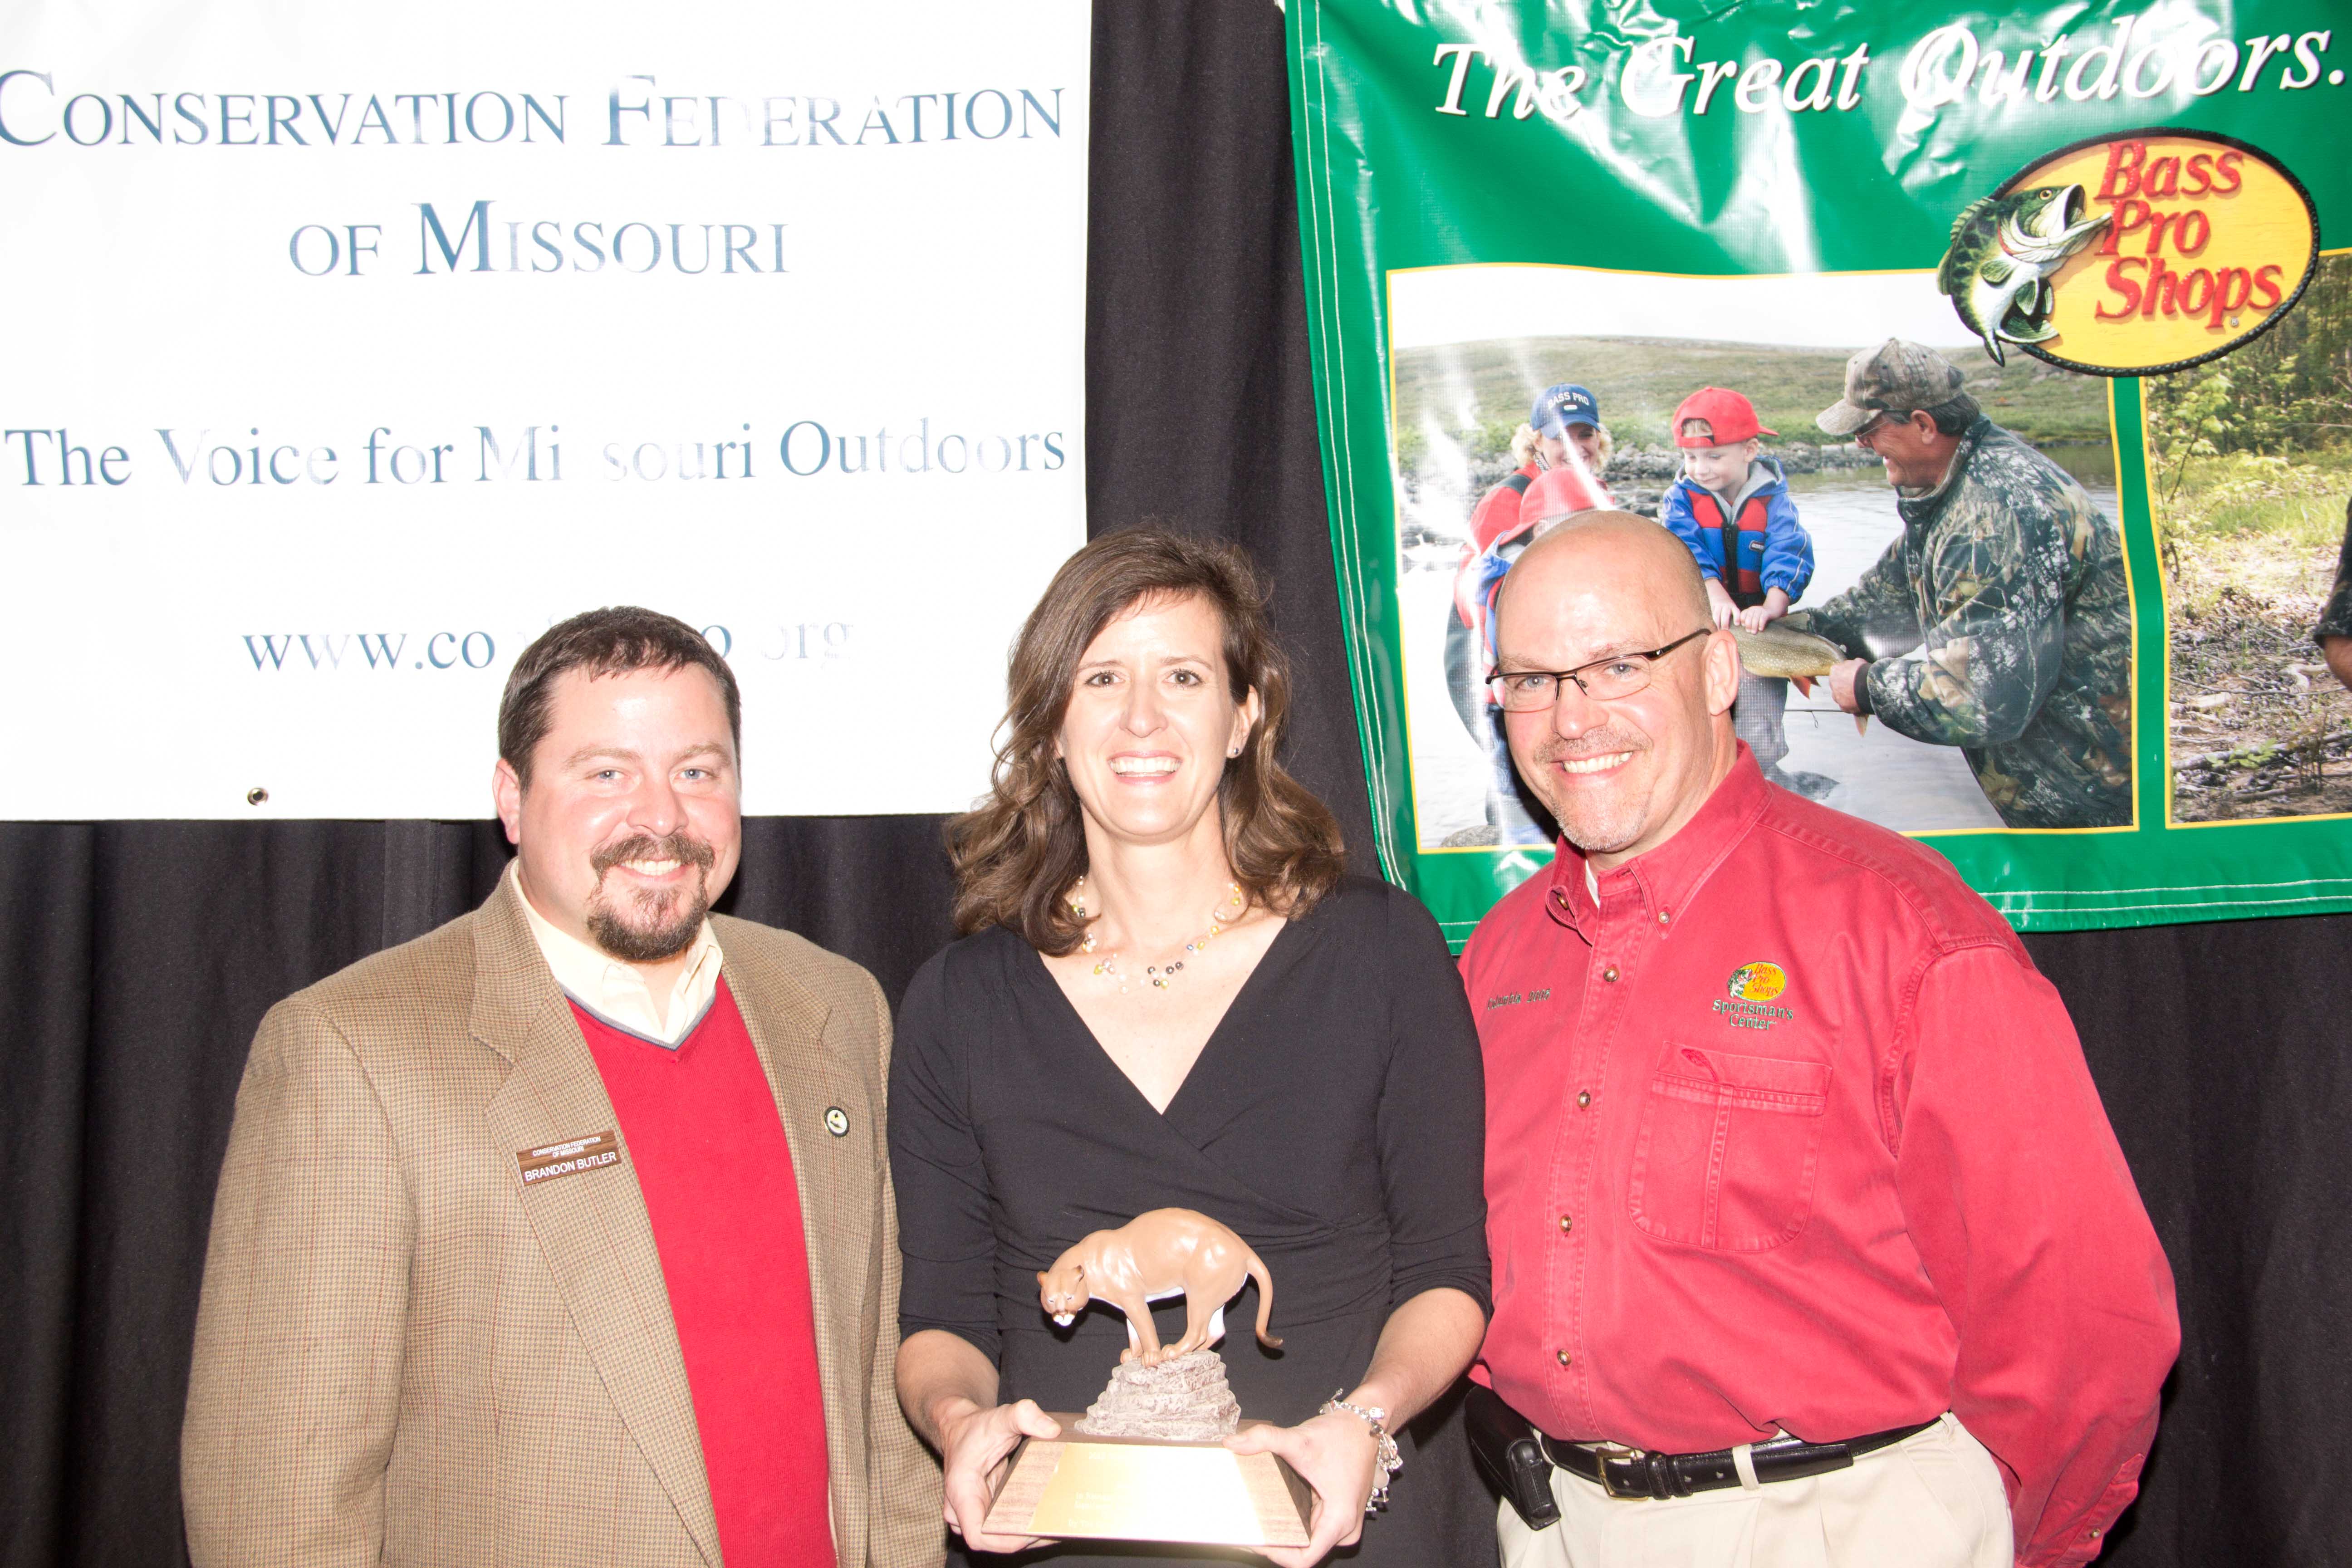 Joanie Straub, center, received the Conservation Communicator of the Year Award